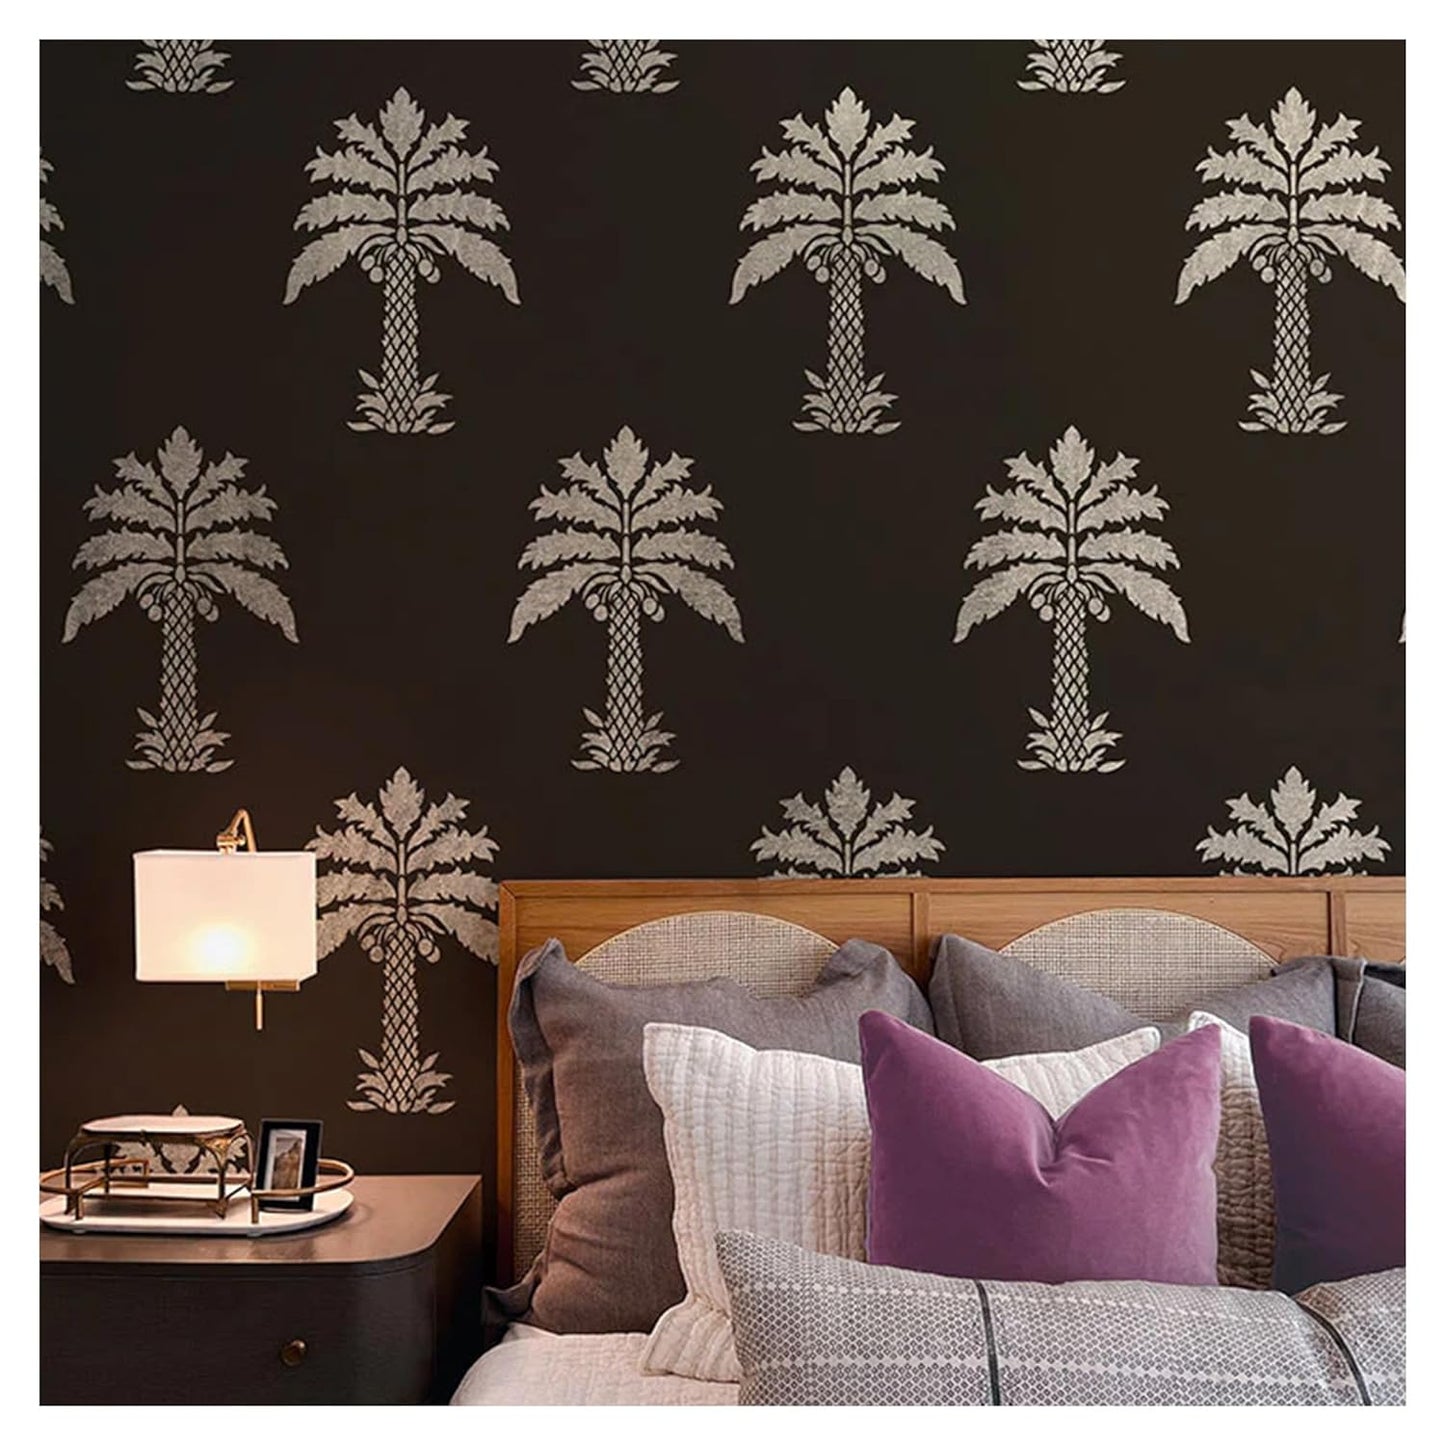 Latest Palm Tree Wall Stencils for Wall Painting - Pack of 1, Sheet Size 24 x 36 inch/Design for Wall Painting 21 x 33 inch - Large